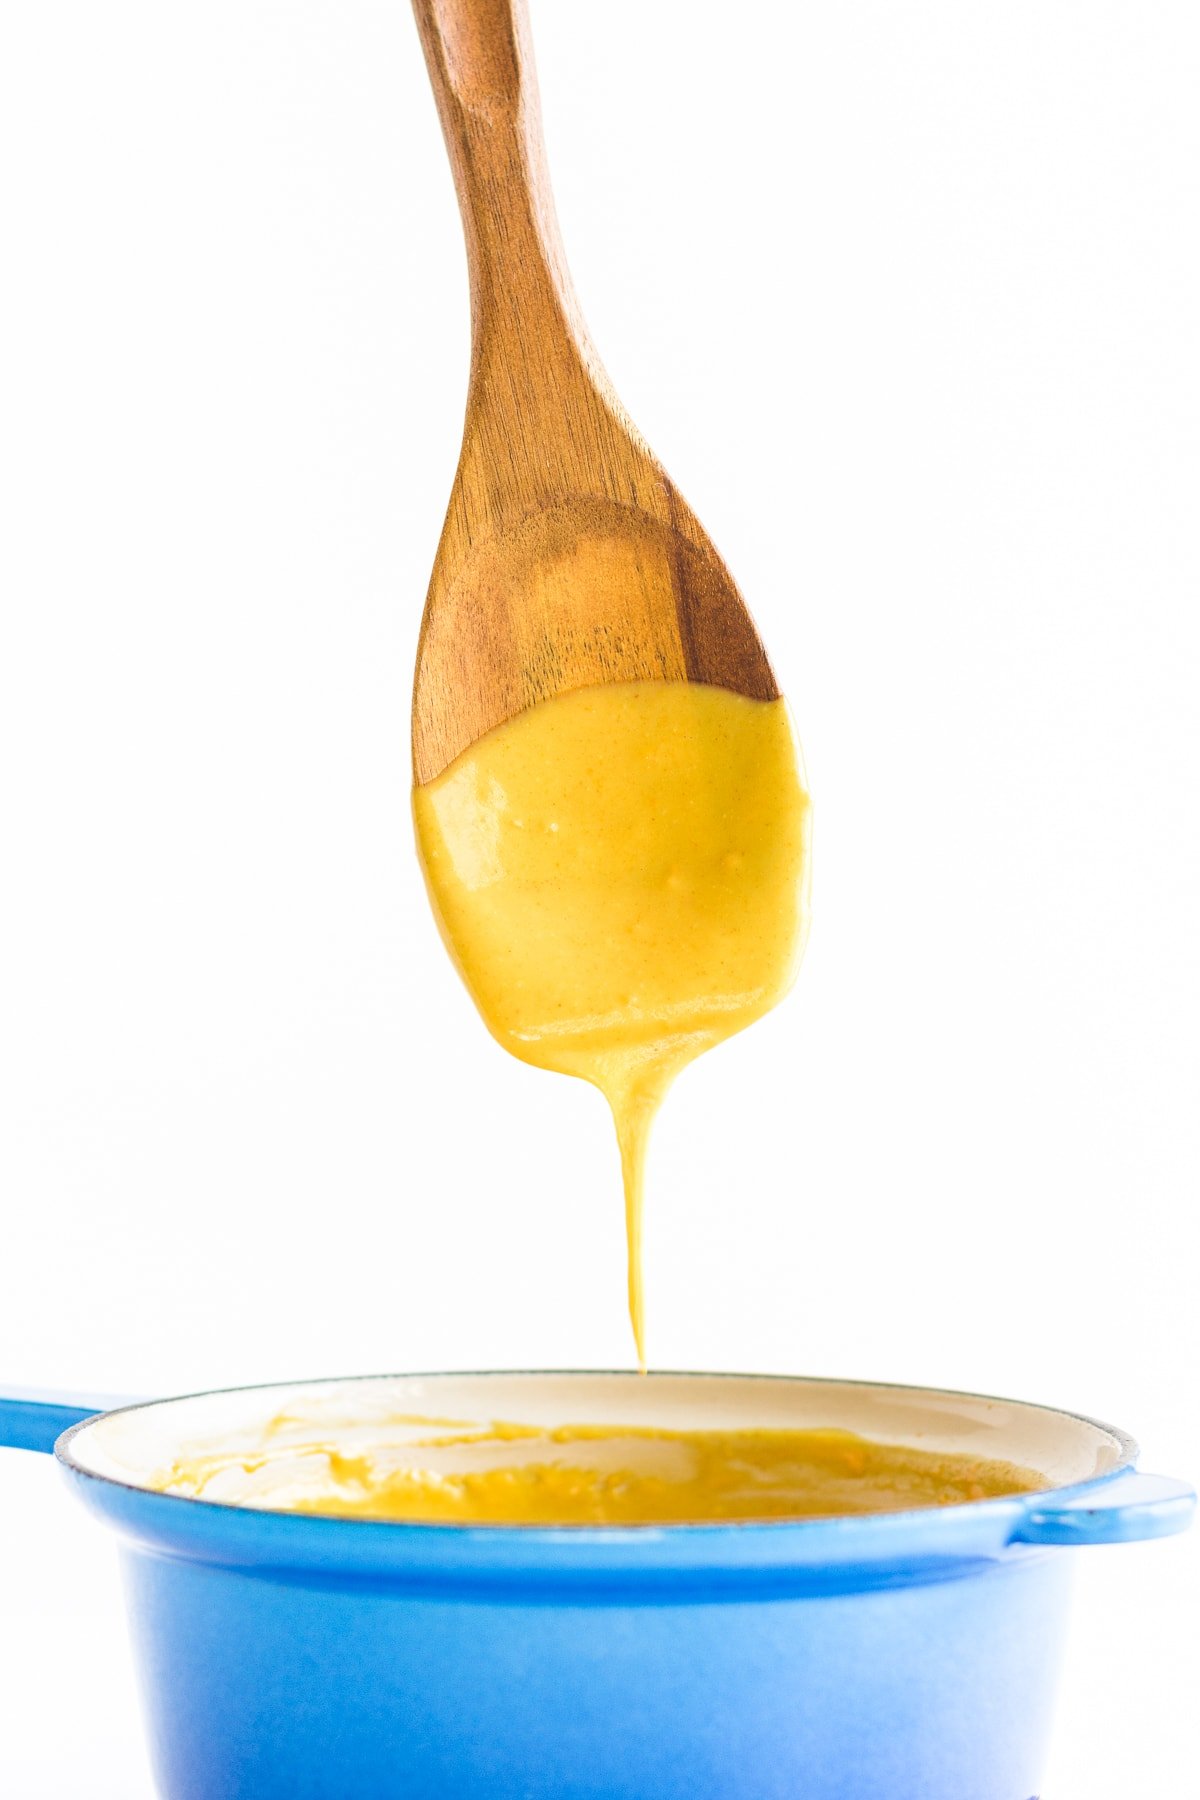 Nacho cheese sauce dripping off a wooden spoon into a blue sauce pan.